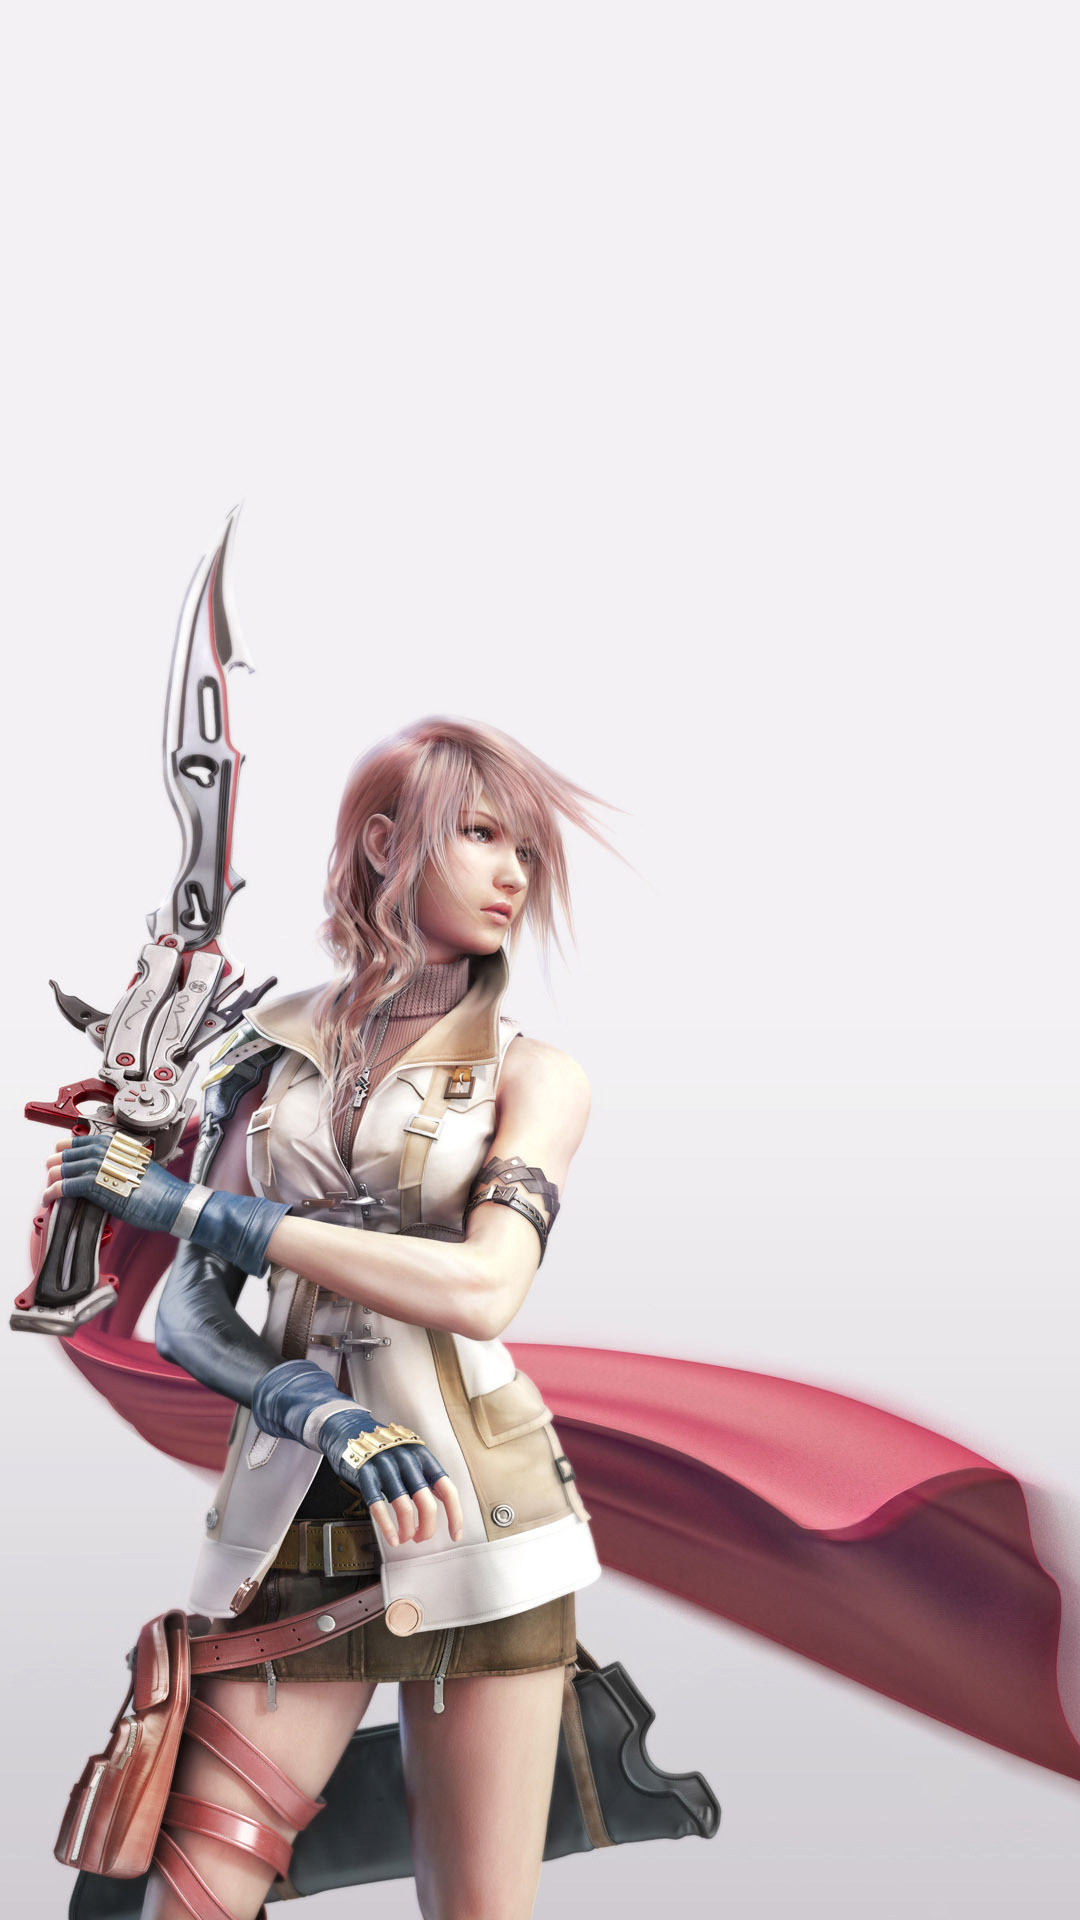 1080x1920 Games Final Fantasy Xiii x Quality HD Wallpapers